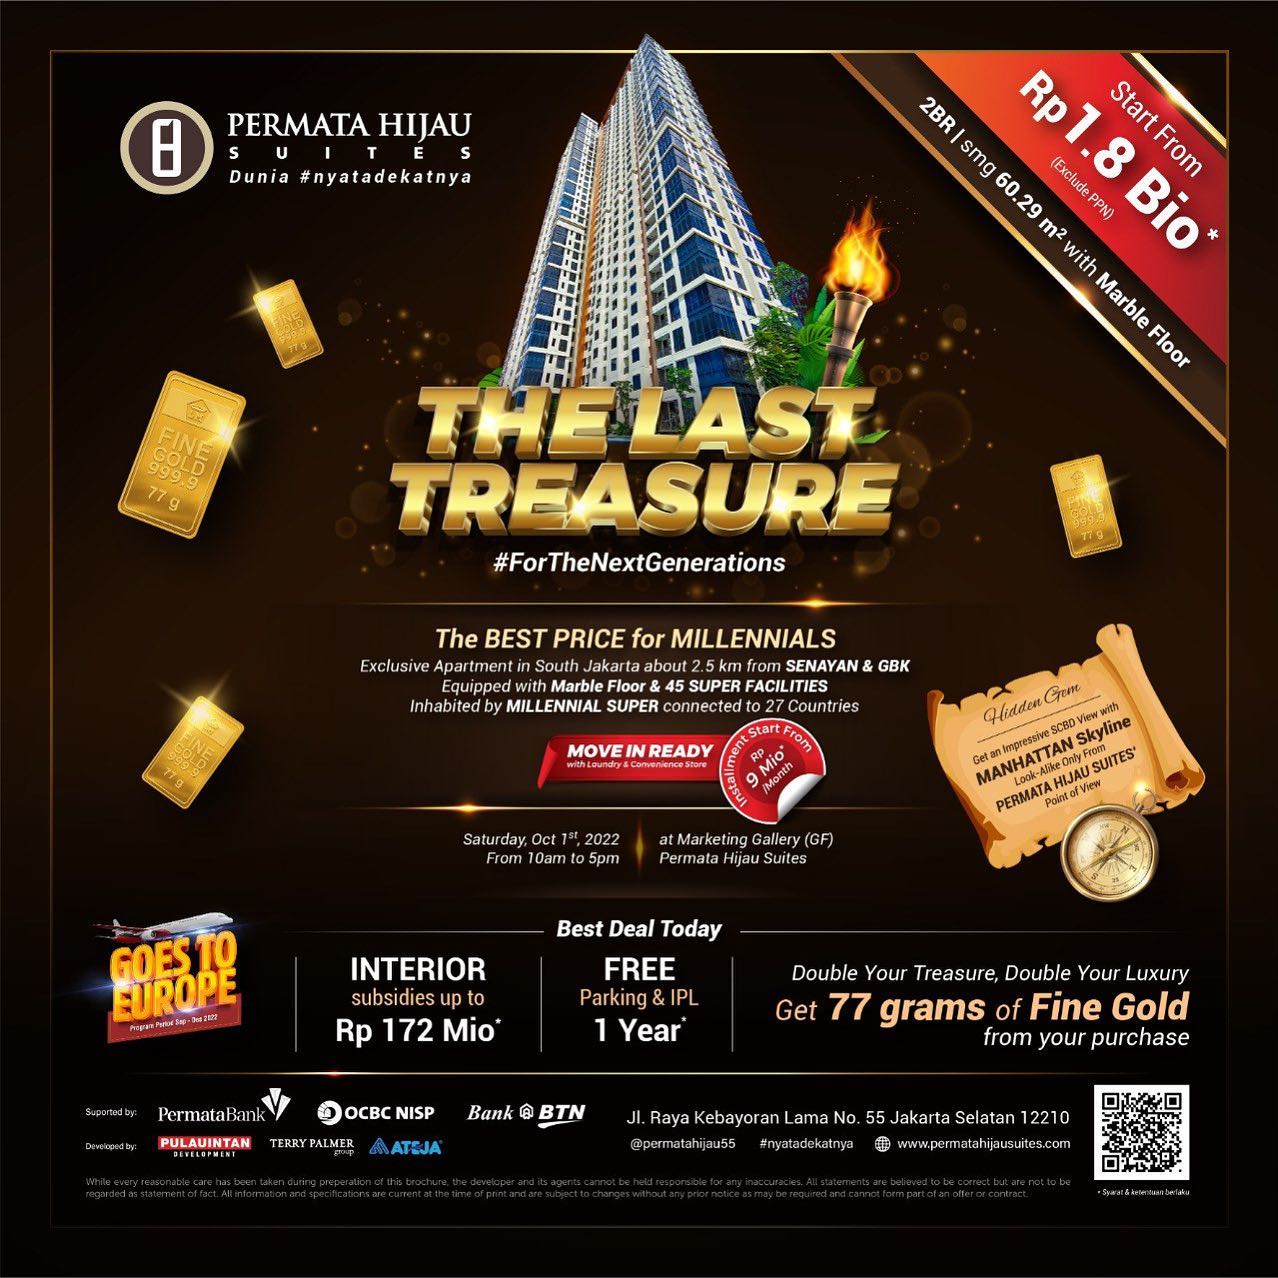 THE BEST PRICE to obtain THE LAST TREASURE with Location Wise, 45 Super Facilities with Superlink Ecosystem to 27 Countries (and still counting)

Exclusive apartment in South Jakarta ONLY 2,5km from Senayan, South view GBK, Impressive panoramic super view (Manhattan skyline look alike). Strategic location near SCBD, Puri Indah, and Pondok Indah. 

2BR equipped with Marble Floor start from 1.8 Bio*. Absolutely The Last Treasure #ForTheNextGenerations.

It doesn't end there!
Double Your investment, Double Your Luxury 
Get 77 grams of Fine Gold from your purchase!

Spare your next Saturday, October 1st  2022 to come to our Marketing Gallery Permata Hijau Suites and get the best deal you'll love!

✅2BR start from Rp 1.8 Bio *excld PPN 
✅Interior Subsidies up to Rp172 Mio
✅Free Parking*
✅Free Maintenance/IPL*

What are you waiting for? Experience living with international neighborhood
⭐ purchase NOW and get your chance to go to EUROPE ⭐

For further information, simply nudge us on DM!
Web: https://permatahijausuites.com/

2BR (60,29 m2) Start from 1,8 Bio
3BR (91,40 m2) Start from 2,7 Bio

Enjoy 45 super facilities including infinity pool, aquatic gym pool, jacuzzi, spa, club lounge, BBQ area, etc.

*terms and conditions apply

#thelasttreasure #apartemenjakartaselatan #permatahijausuites #nyatadekatnya #apartemenjakarta #apartemenjaksel #apartemen2bedroom #apartemensiaphunijakarta #diaspora #professional #apartemenmilenial #apartemensegalabangsa #whereyoungexpatslive